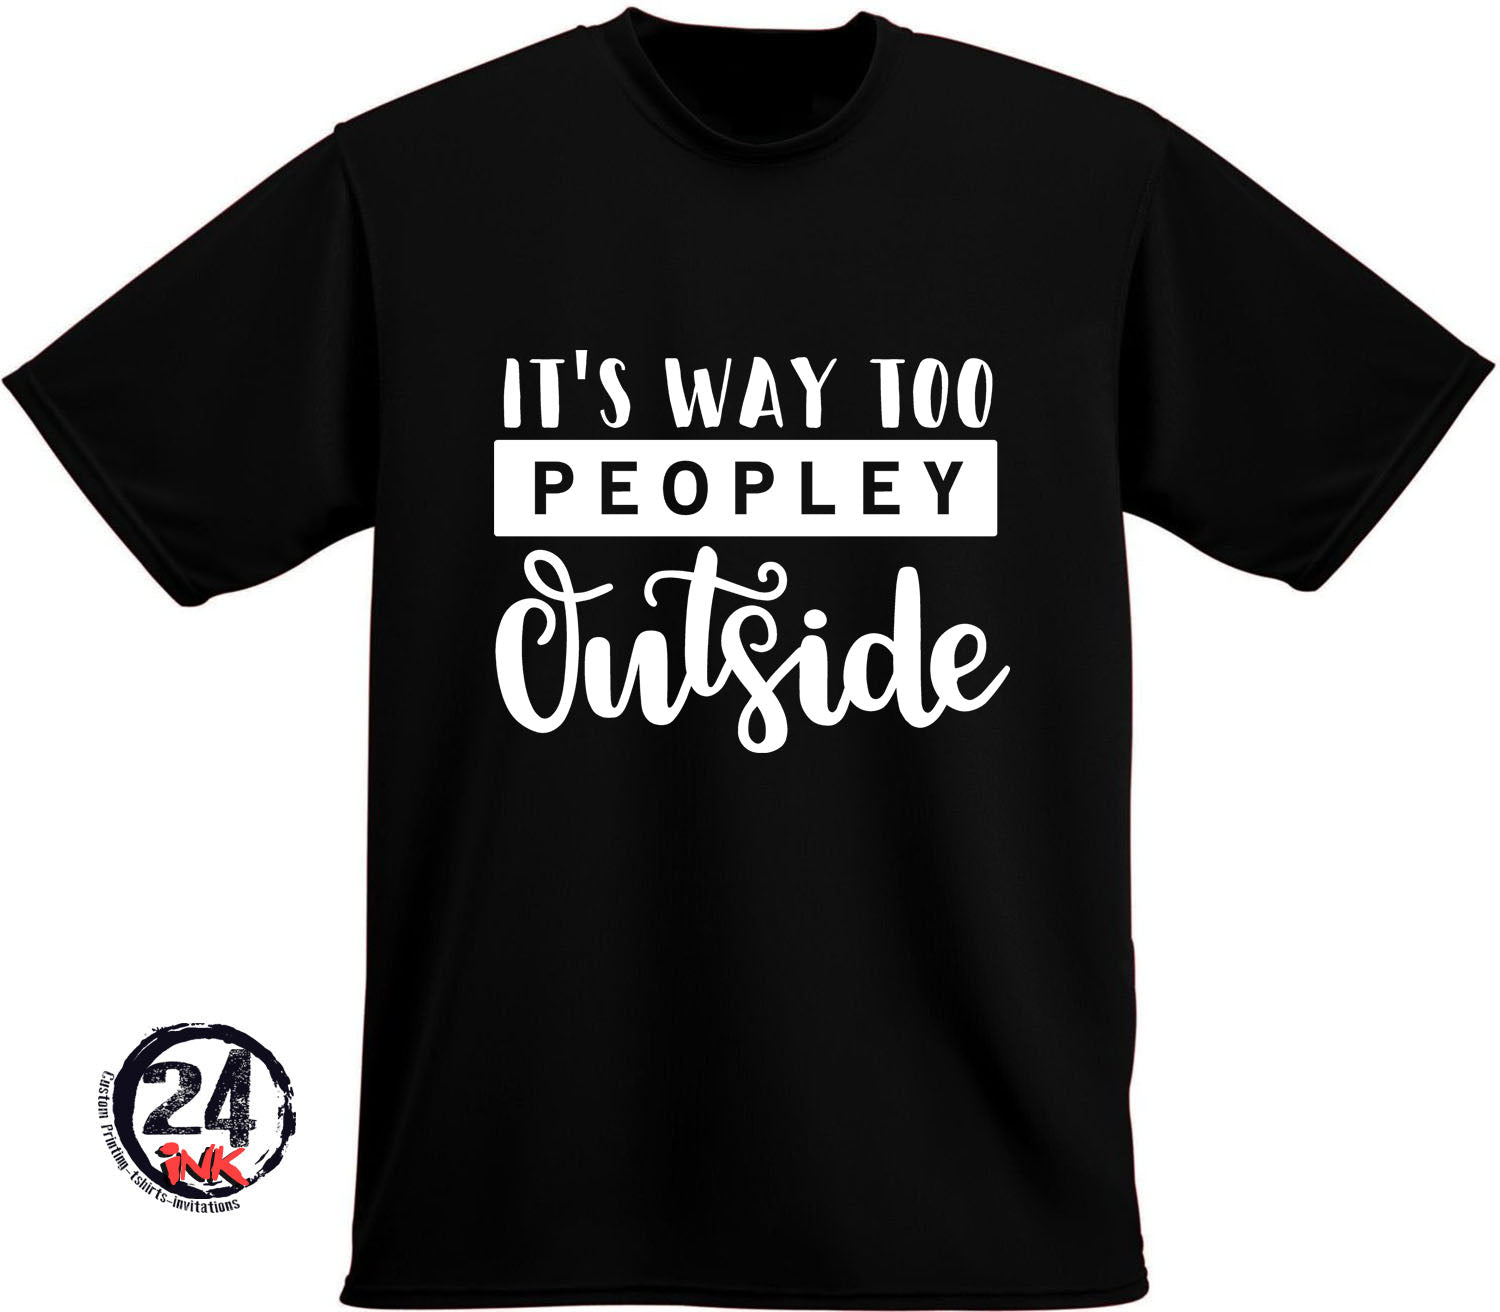 It's way too peopley outside shirt